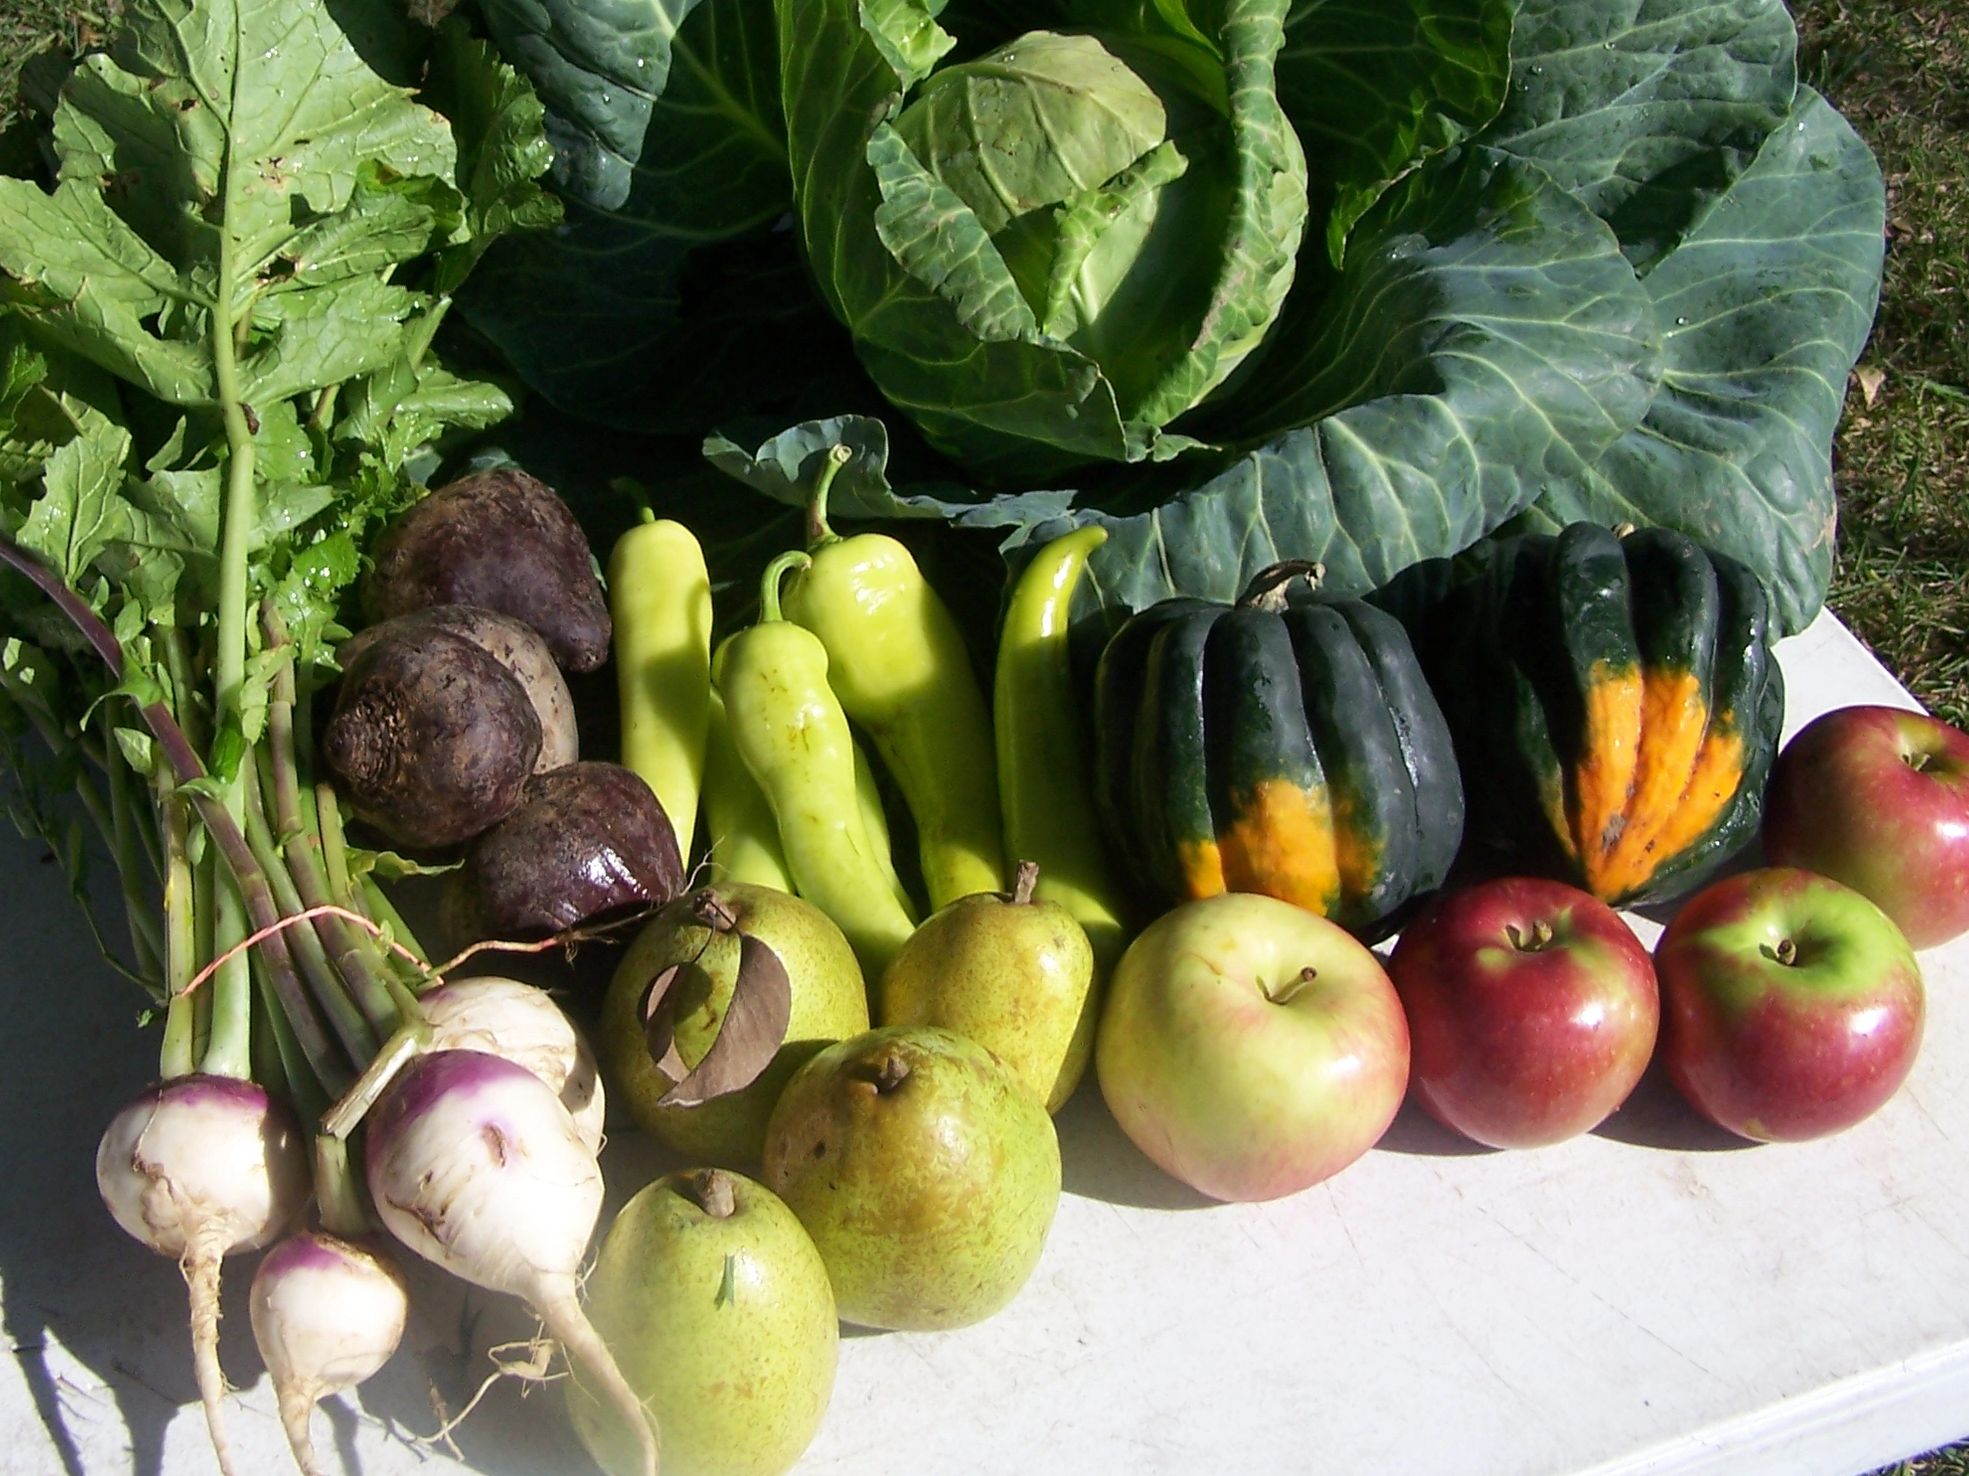 A variety of farm produce is laid out on a table outdoors as an example of a CSA package.